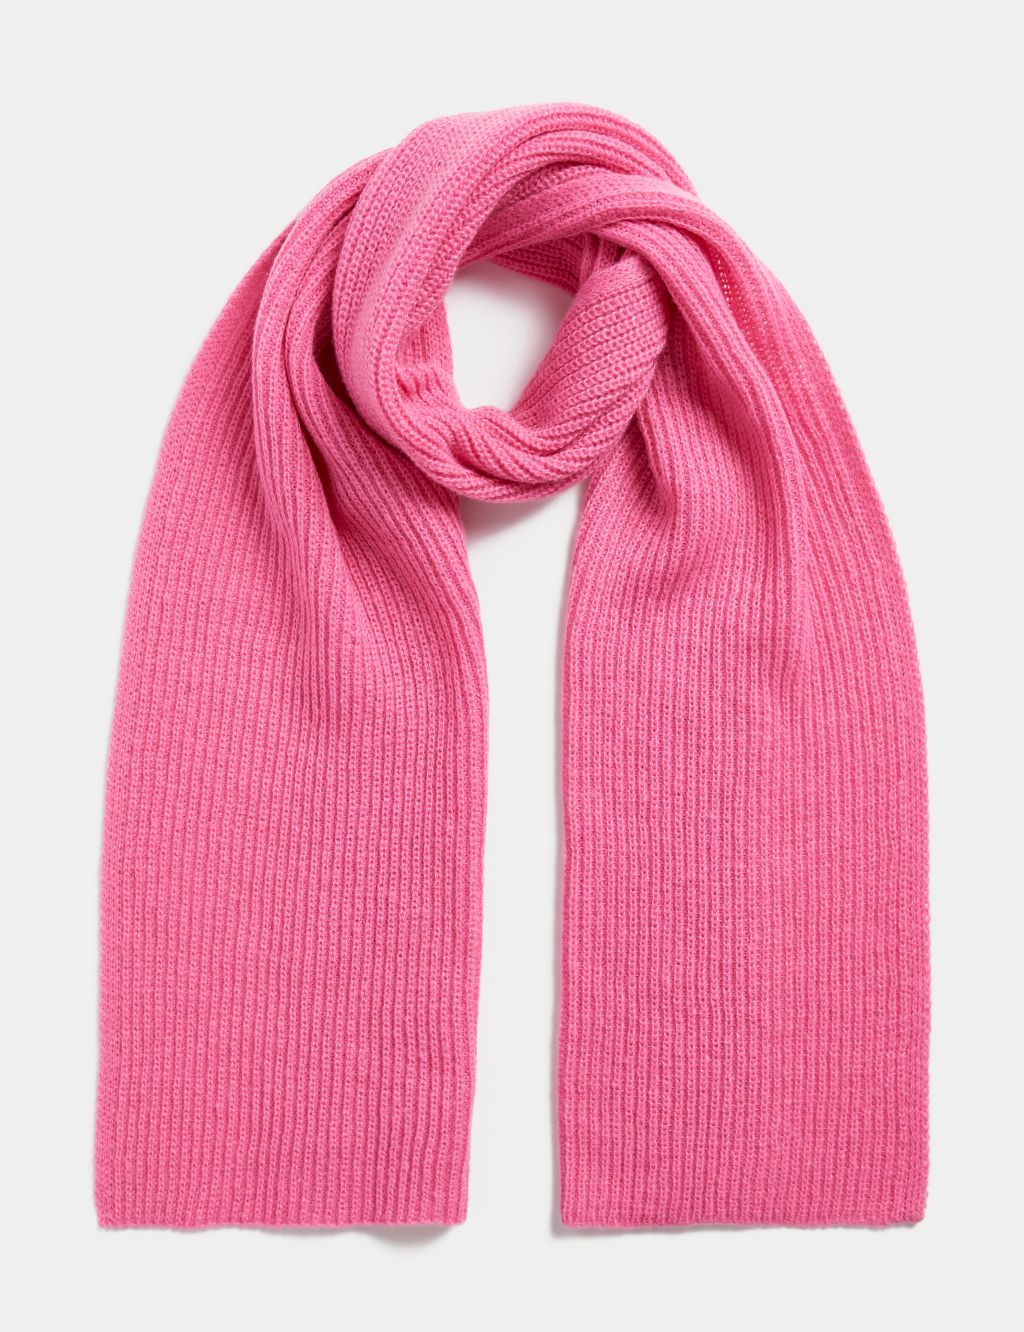 Knitted Ribbed Scarf image 1